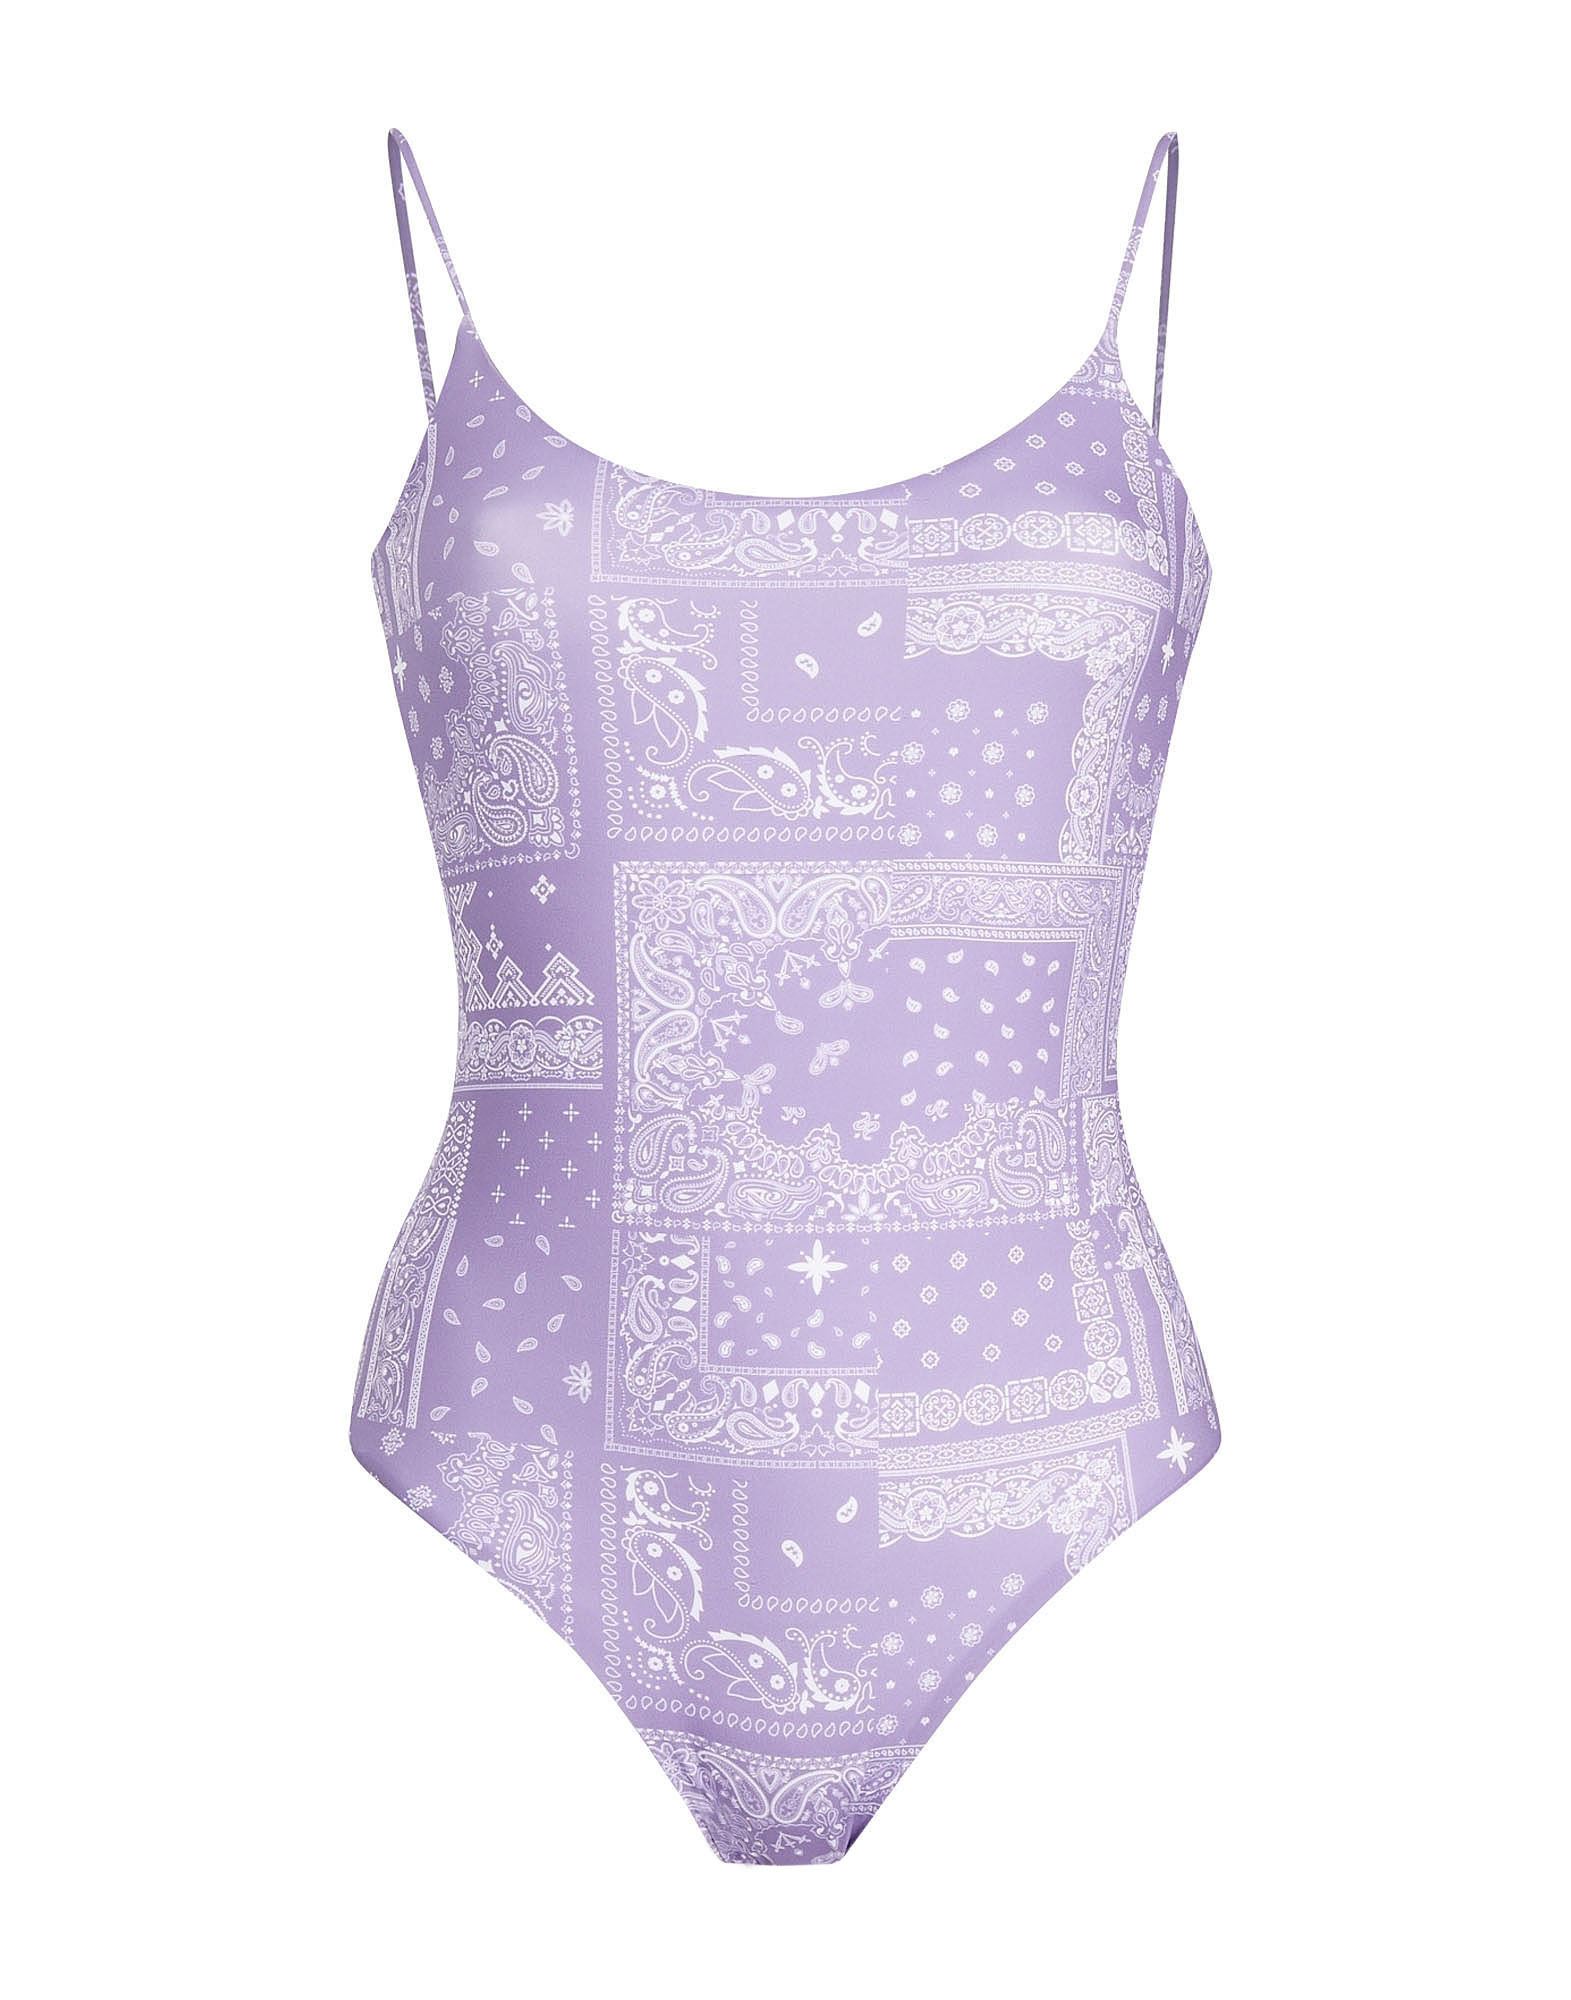 8 by YOOX fB[X is[Xj PRINTED RECYCLED POLY ONE-PIECE SWIMSUIT CbN